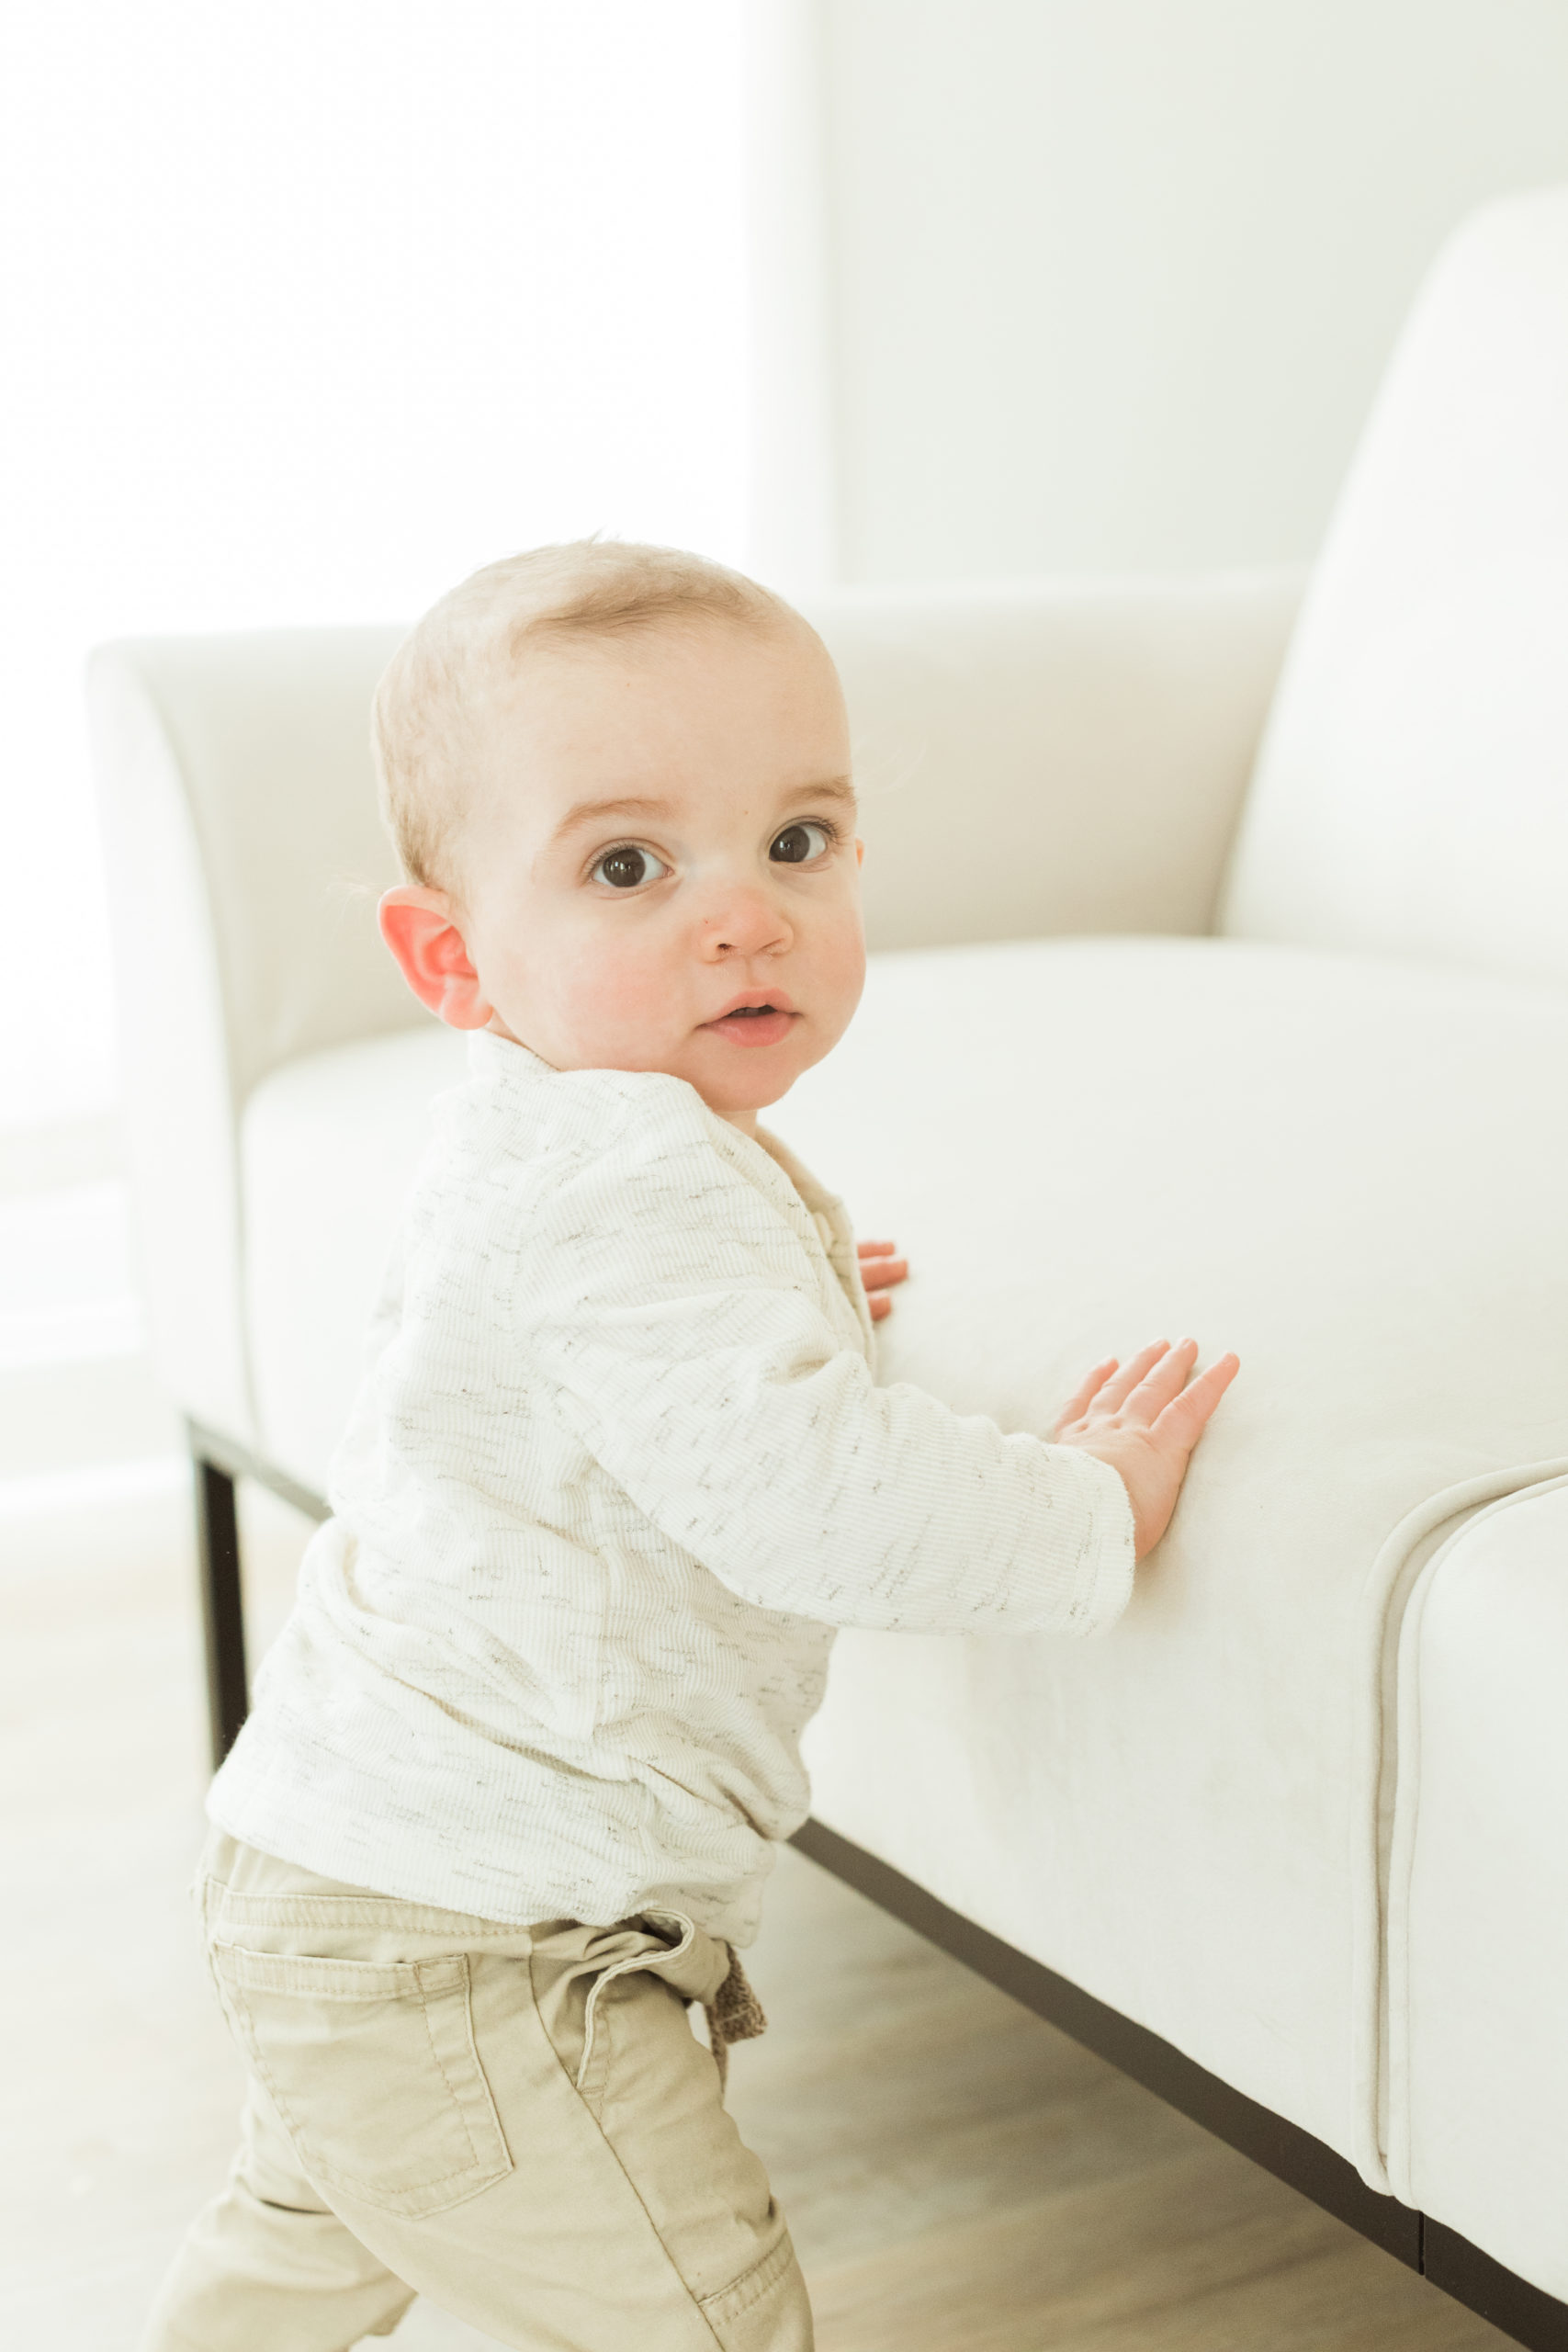 One year old baby boy standing up and leaning on light cream sofa chair. Little boy wearing light cream long sleeve and khaki pants. Photographed in studio under natural light.
